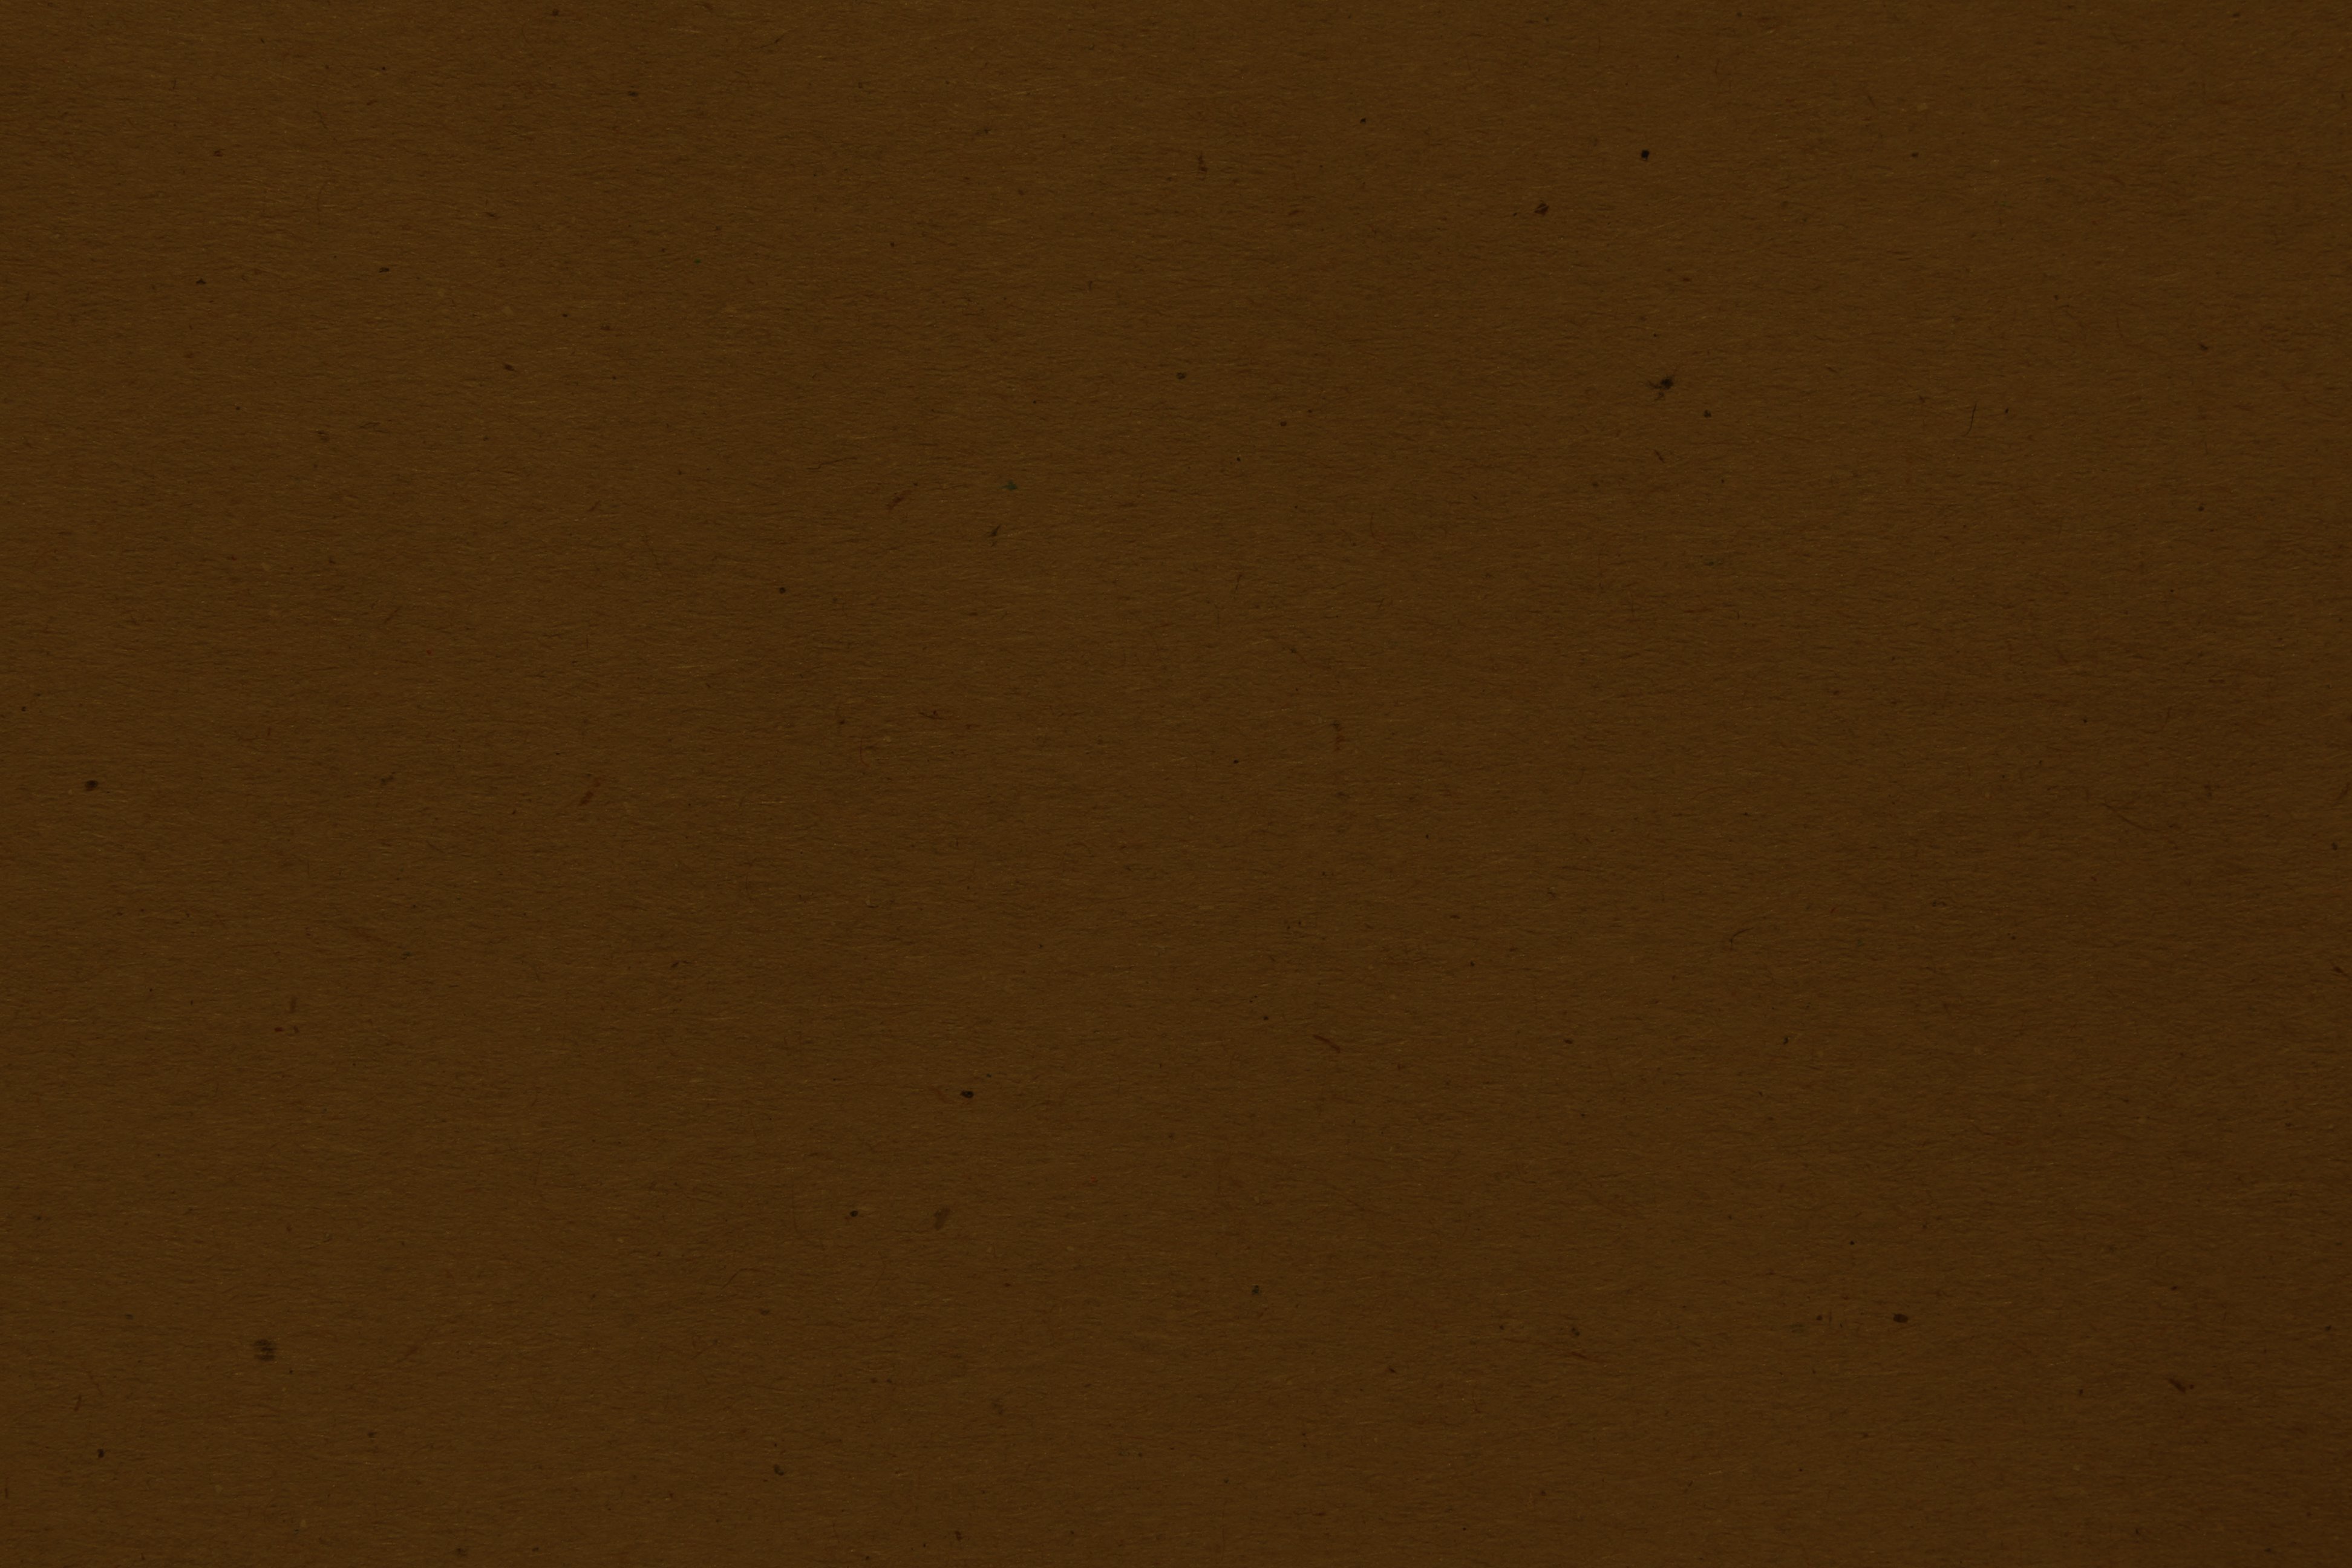 Brown Paper Texture with Flecks Picture, Free Photograph